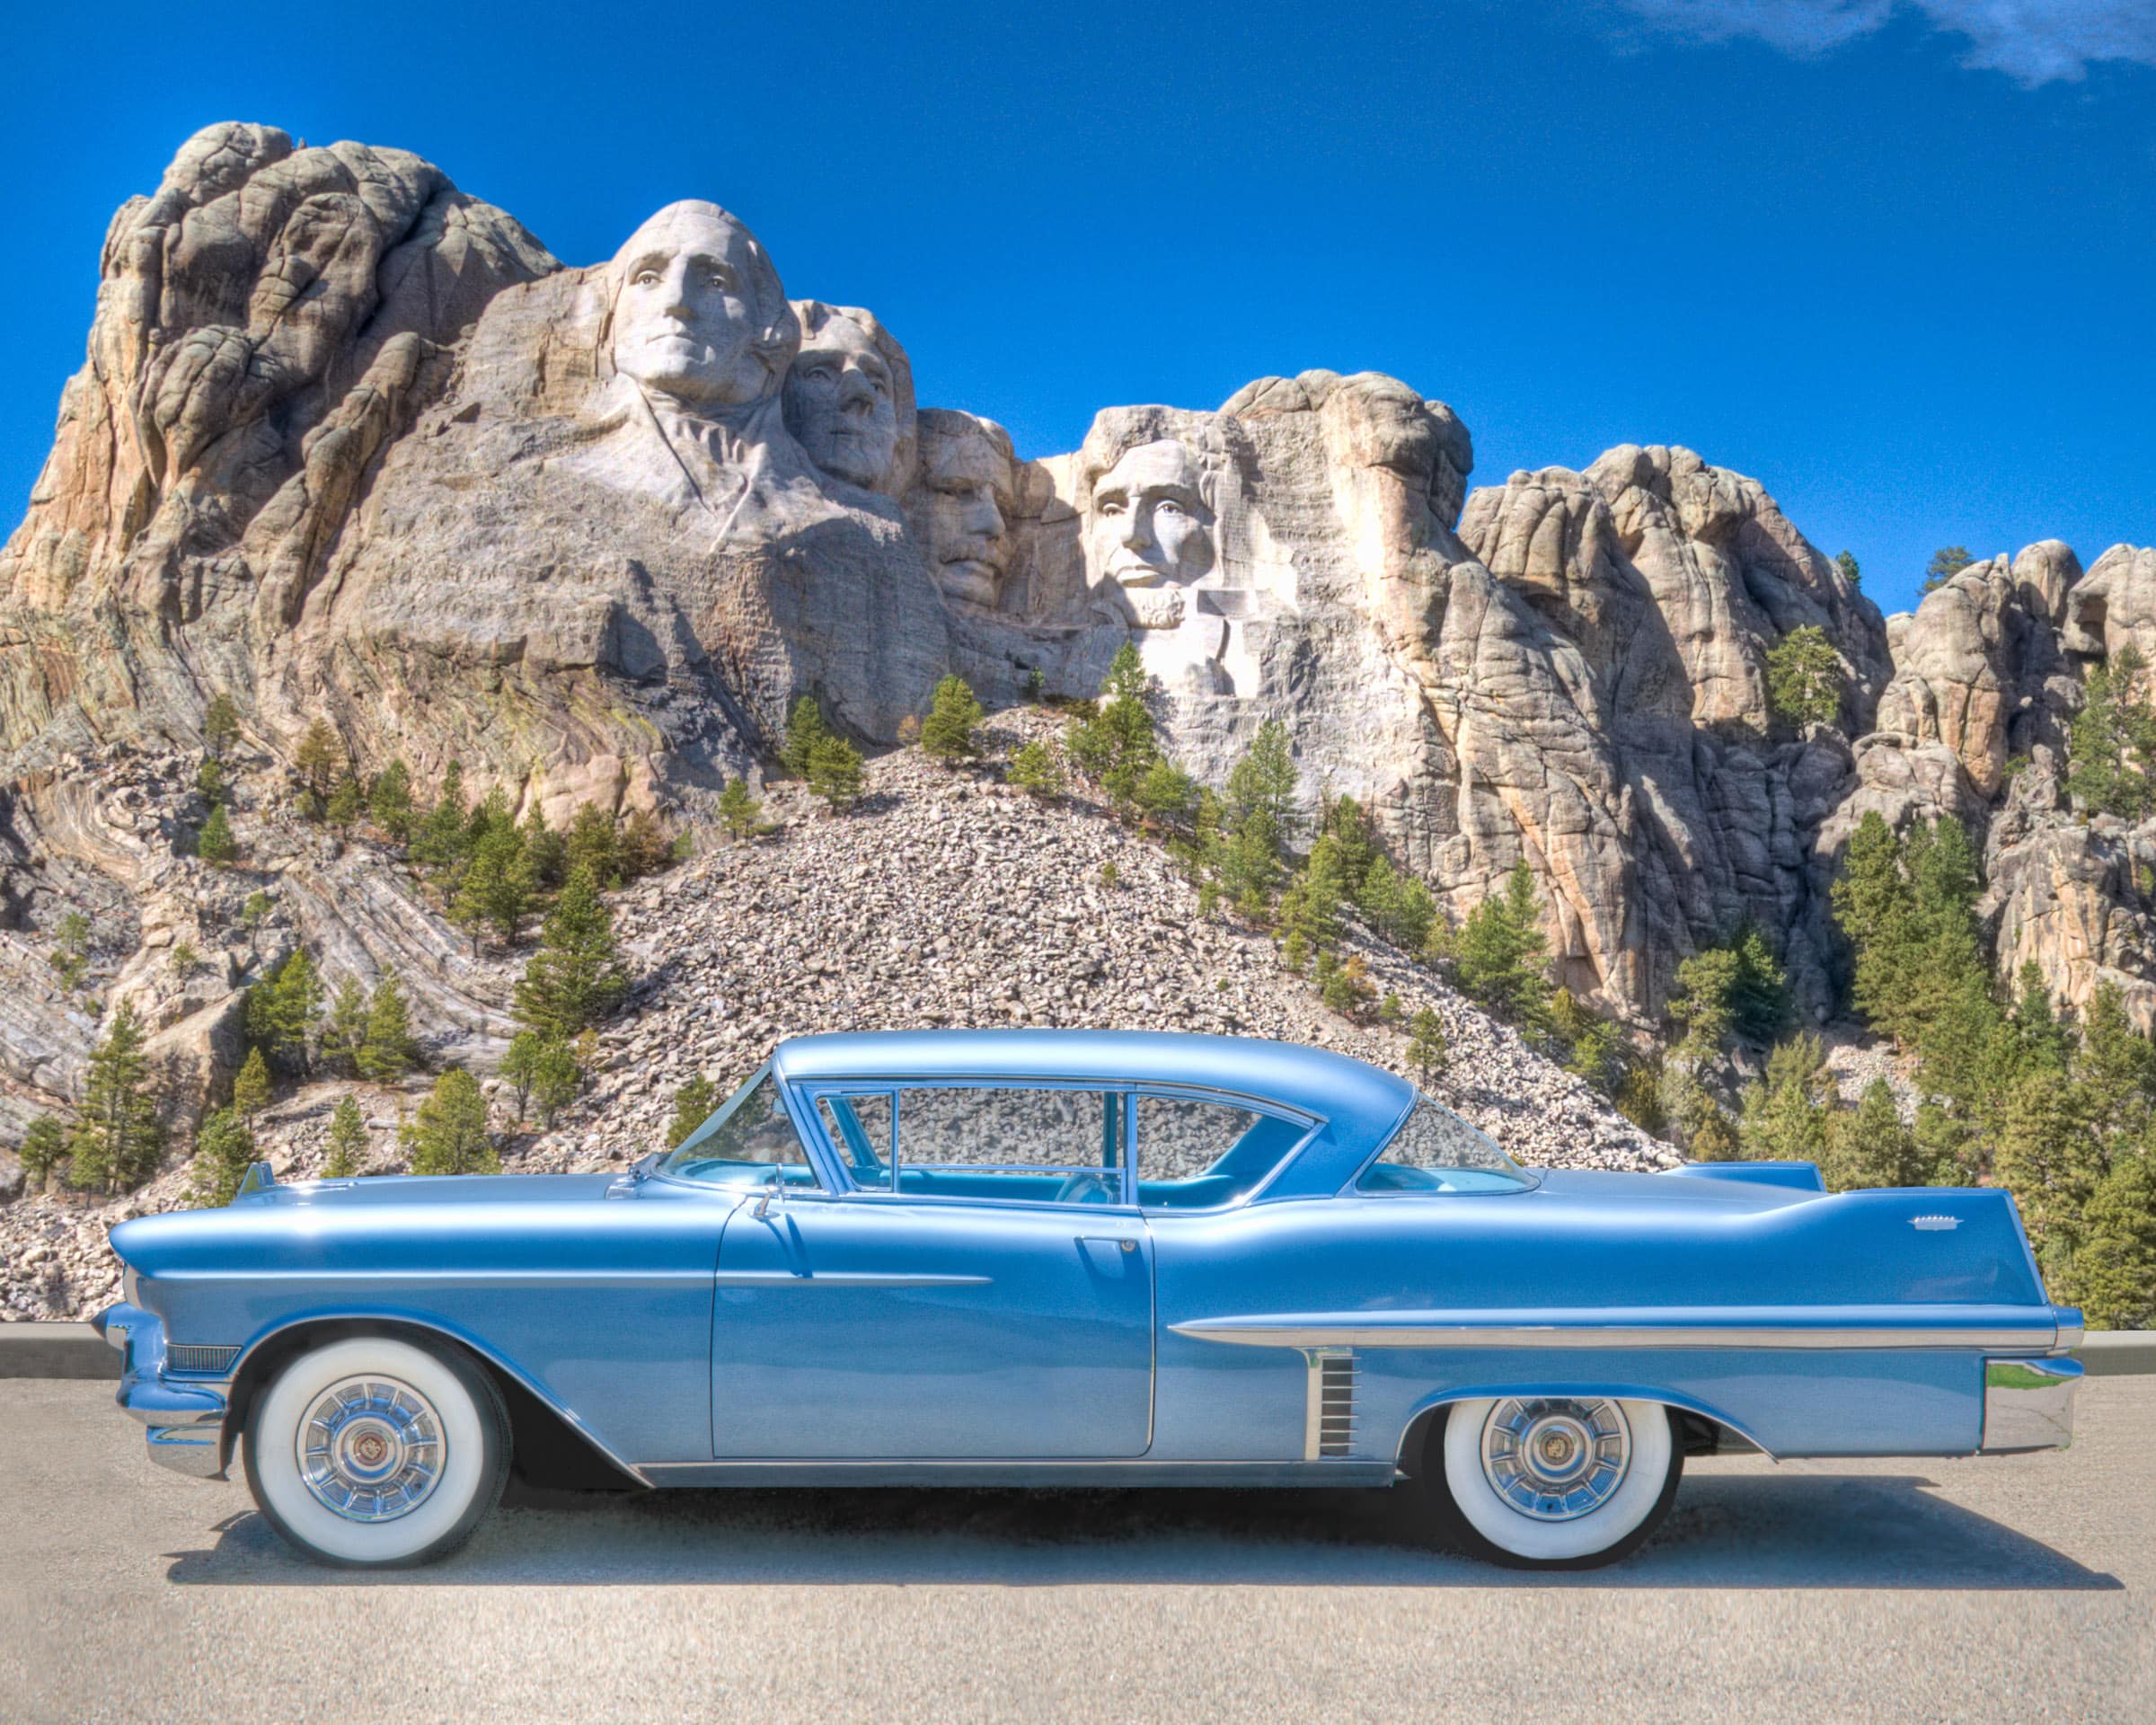 1957 Cadillac Series 62 Coupe at Mount Rushmore.